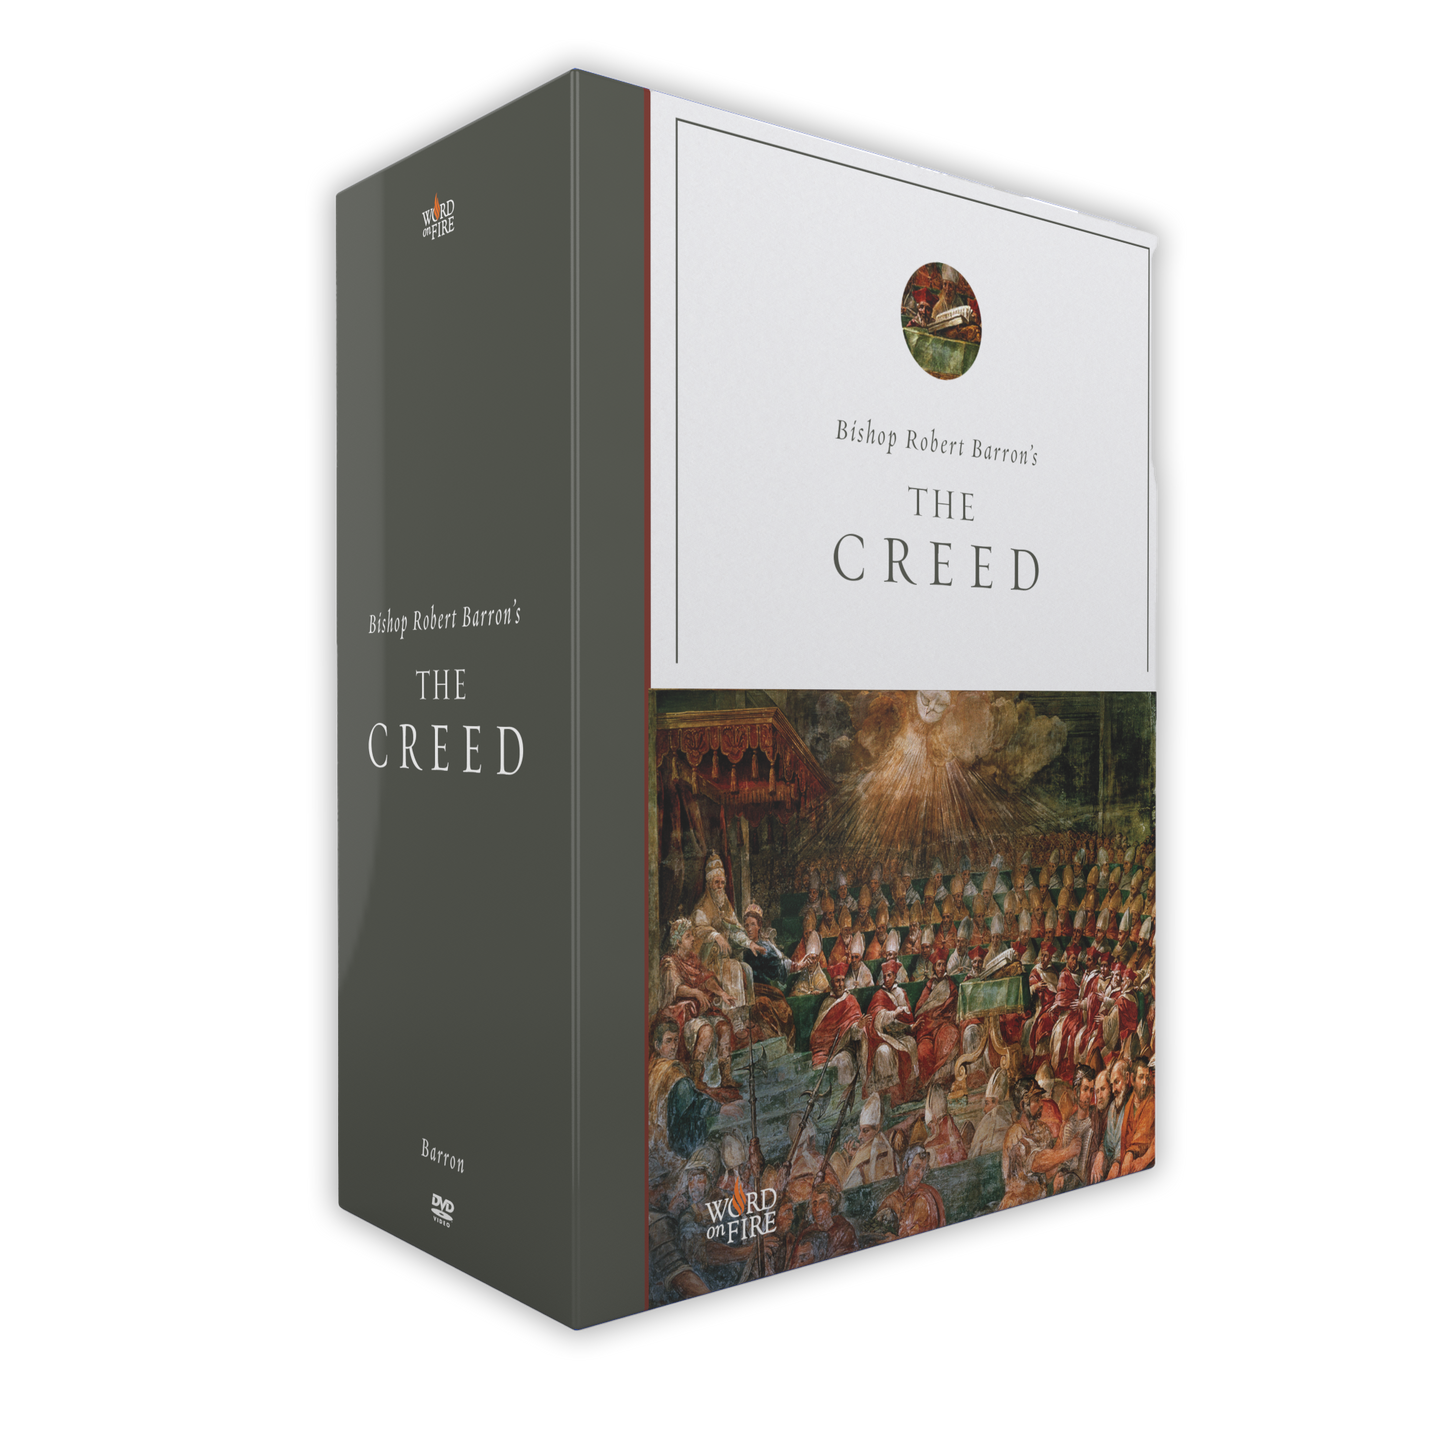 The Creed Film Series